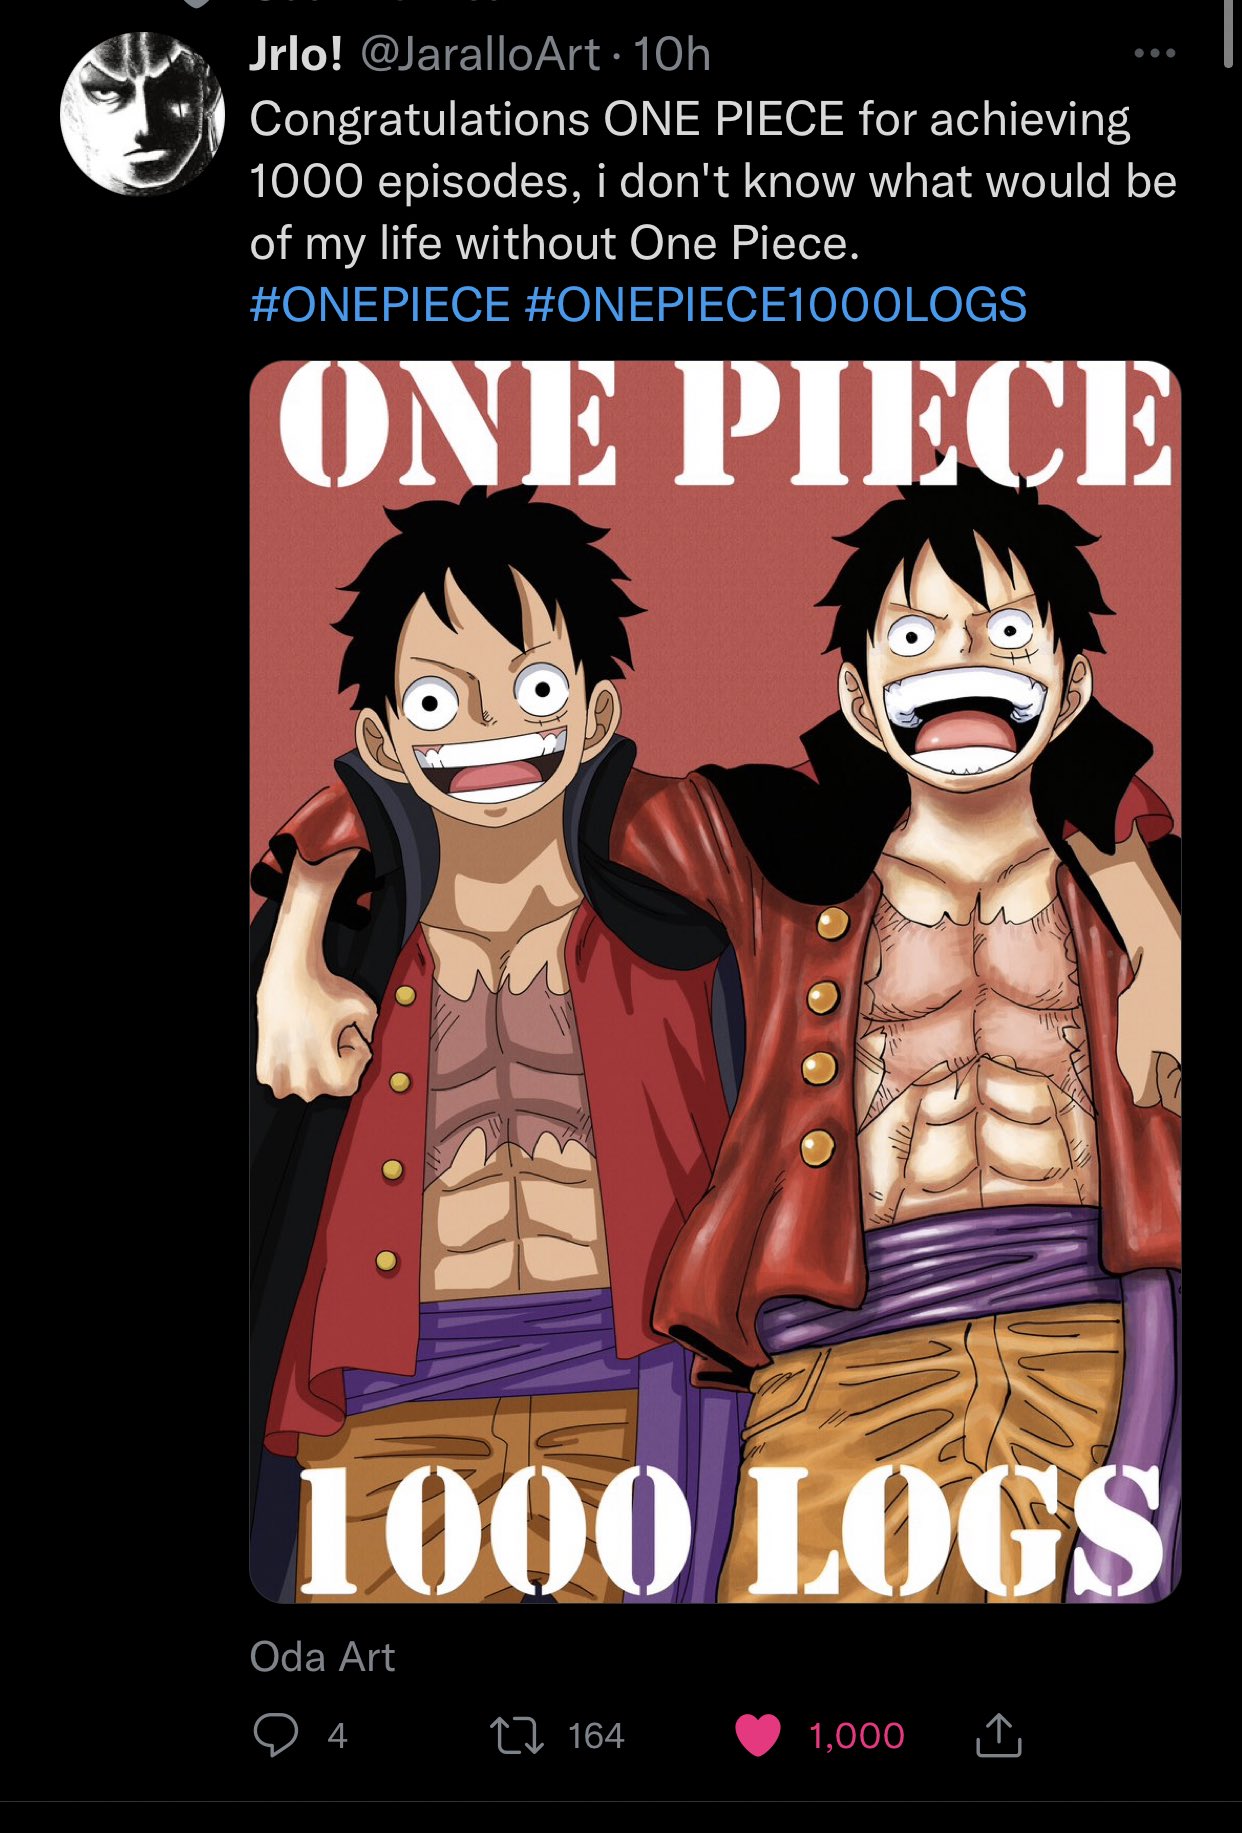 Runo Congratulations One Piece For Achieving 1000 Episodes I Don T Know What Would Be Of My Life Without One Piece Onepiece Onepiece1000logs T Co 4yhxsln0e7 Twitter